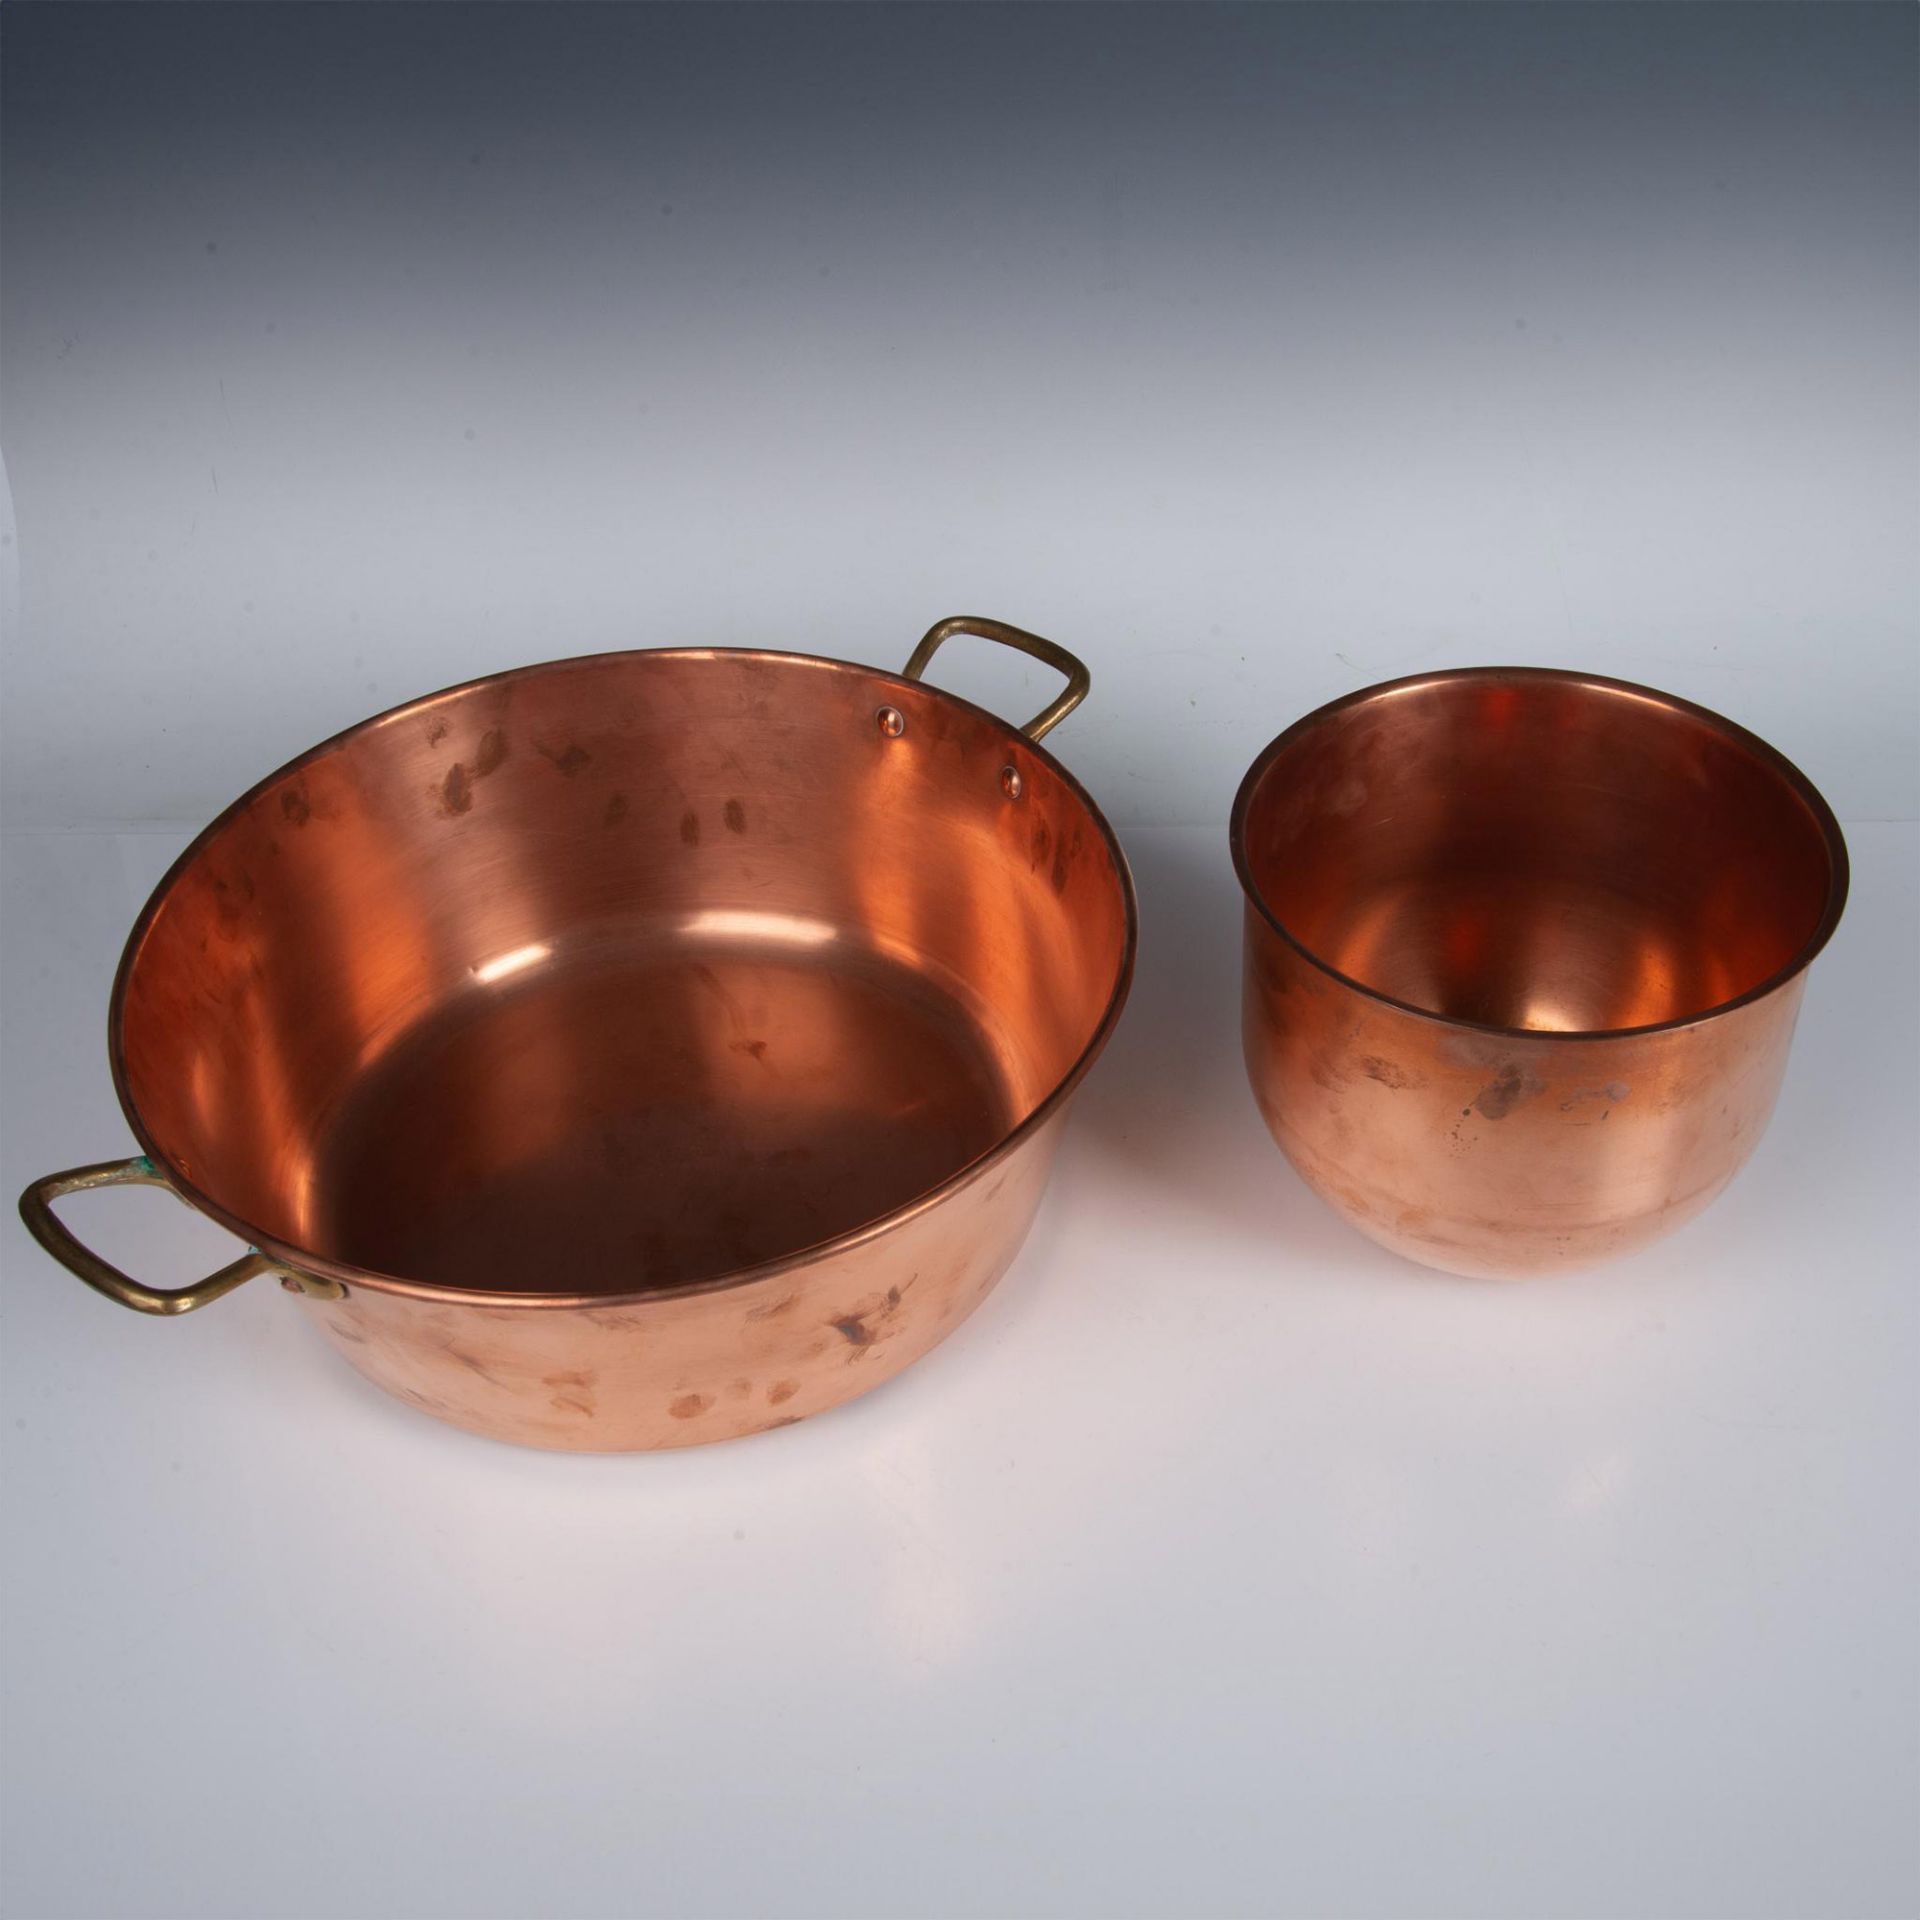 2pc Copper Cookware, Mixing Bowl and Jam Pot - Image 2 of 4